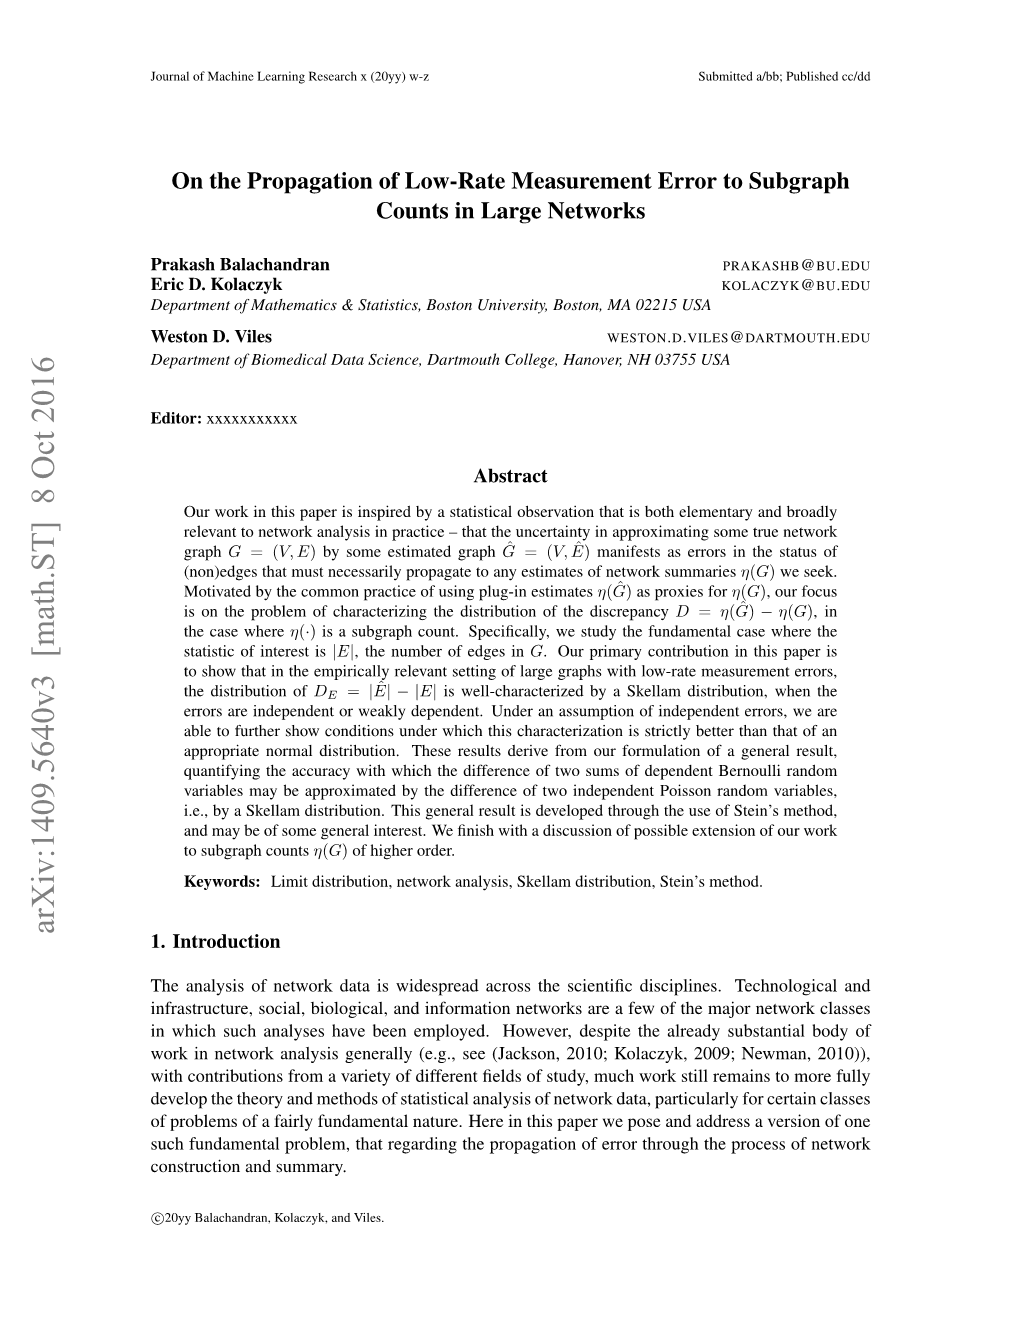 On the Propagation of Low-Rate Measurement Error to Subgraph Counts in Large Networks